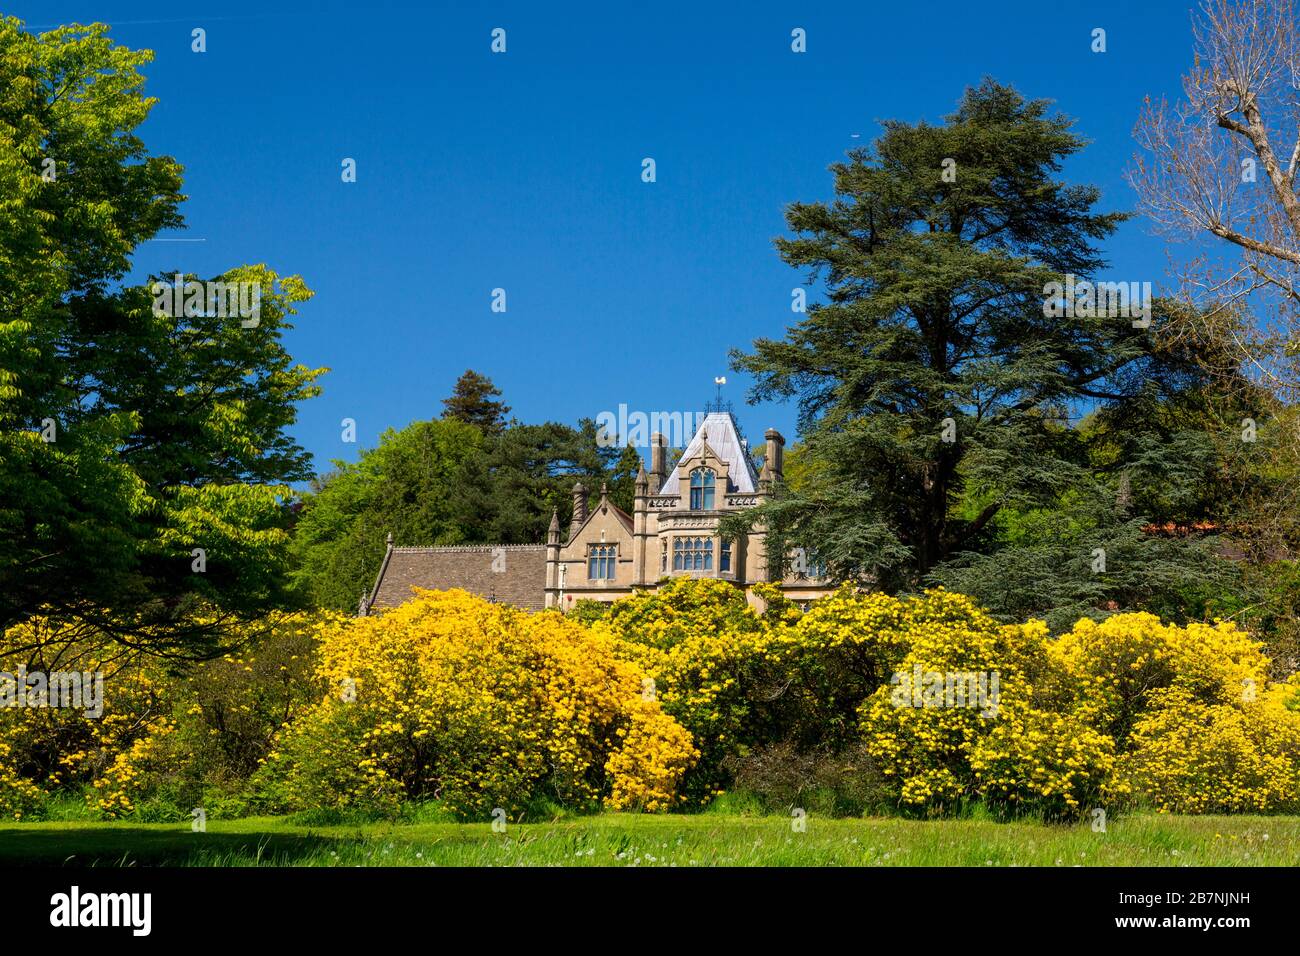 Victorian Gothic Revival architecture and colourful azaleas at Tyntesfield House, nr Wraxall, North Somerset, England, UK Stock Photo